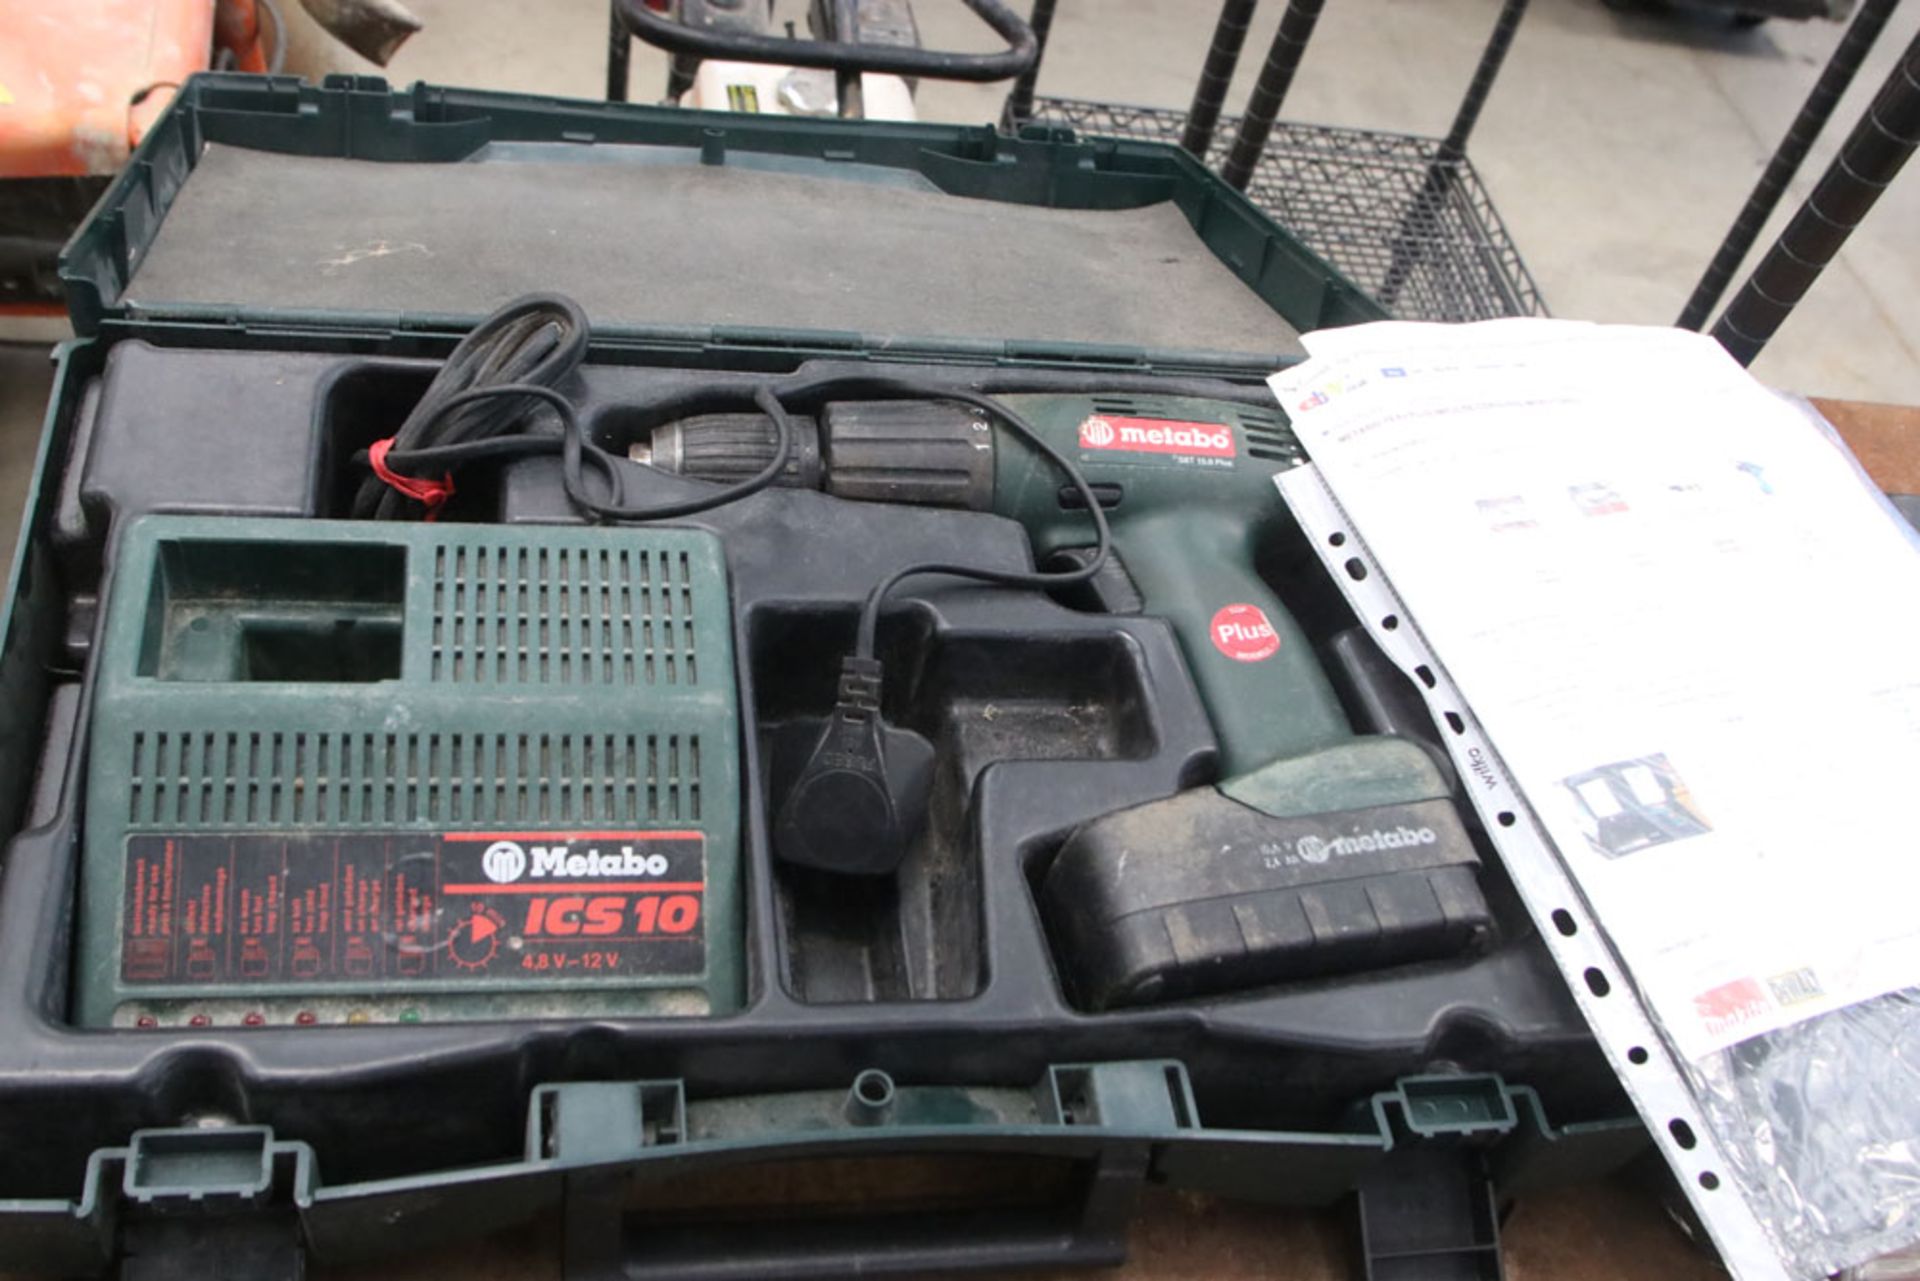 Metabo battery drill with 1 battery and charger